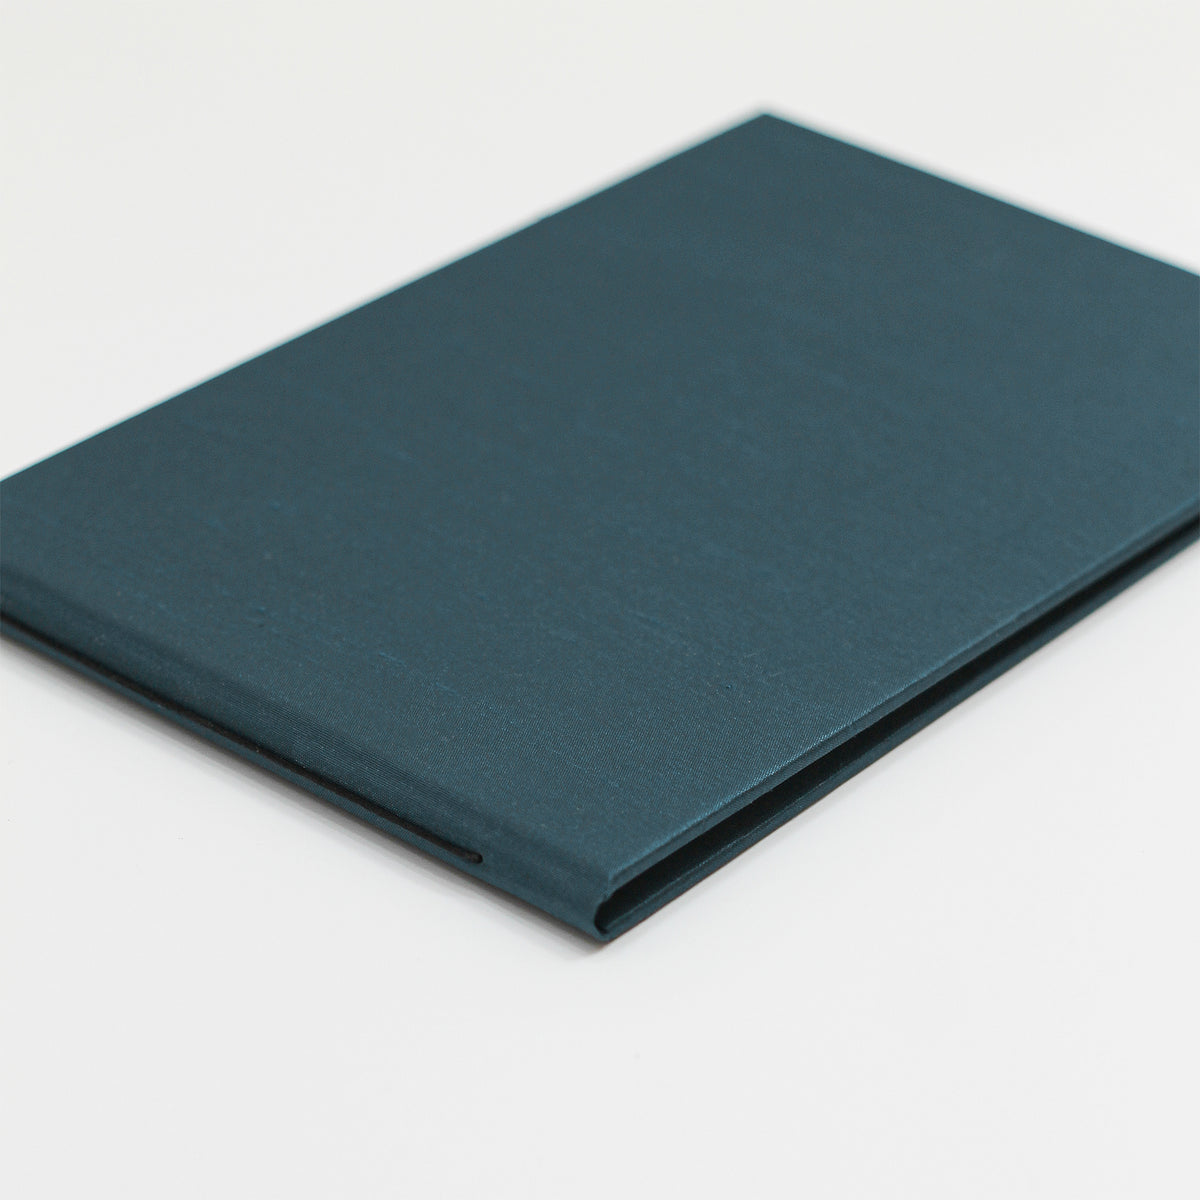 Guestbook Embossed with “Guests” | Cover: Teal Blue Silk | Available Personalized